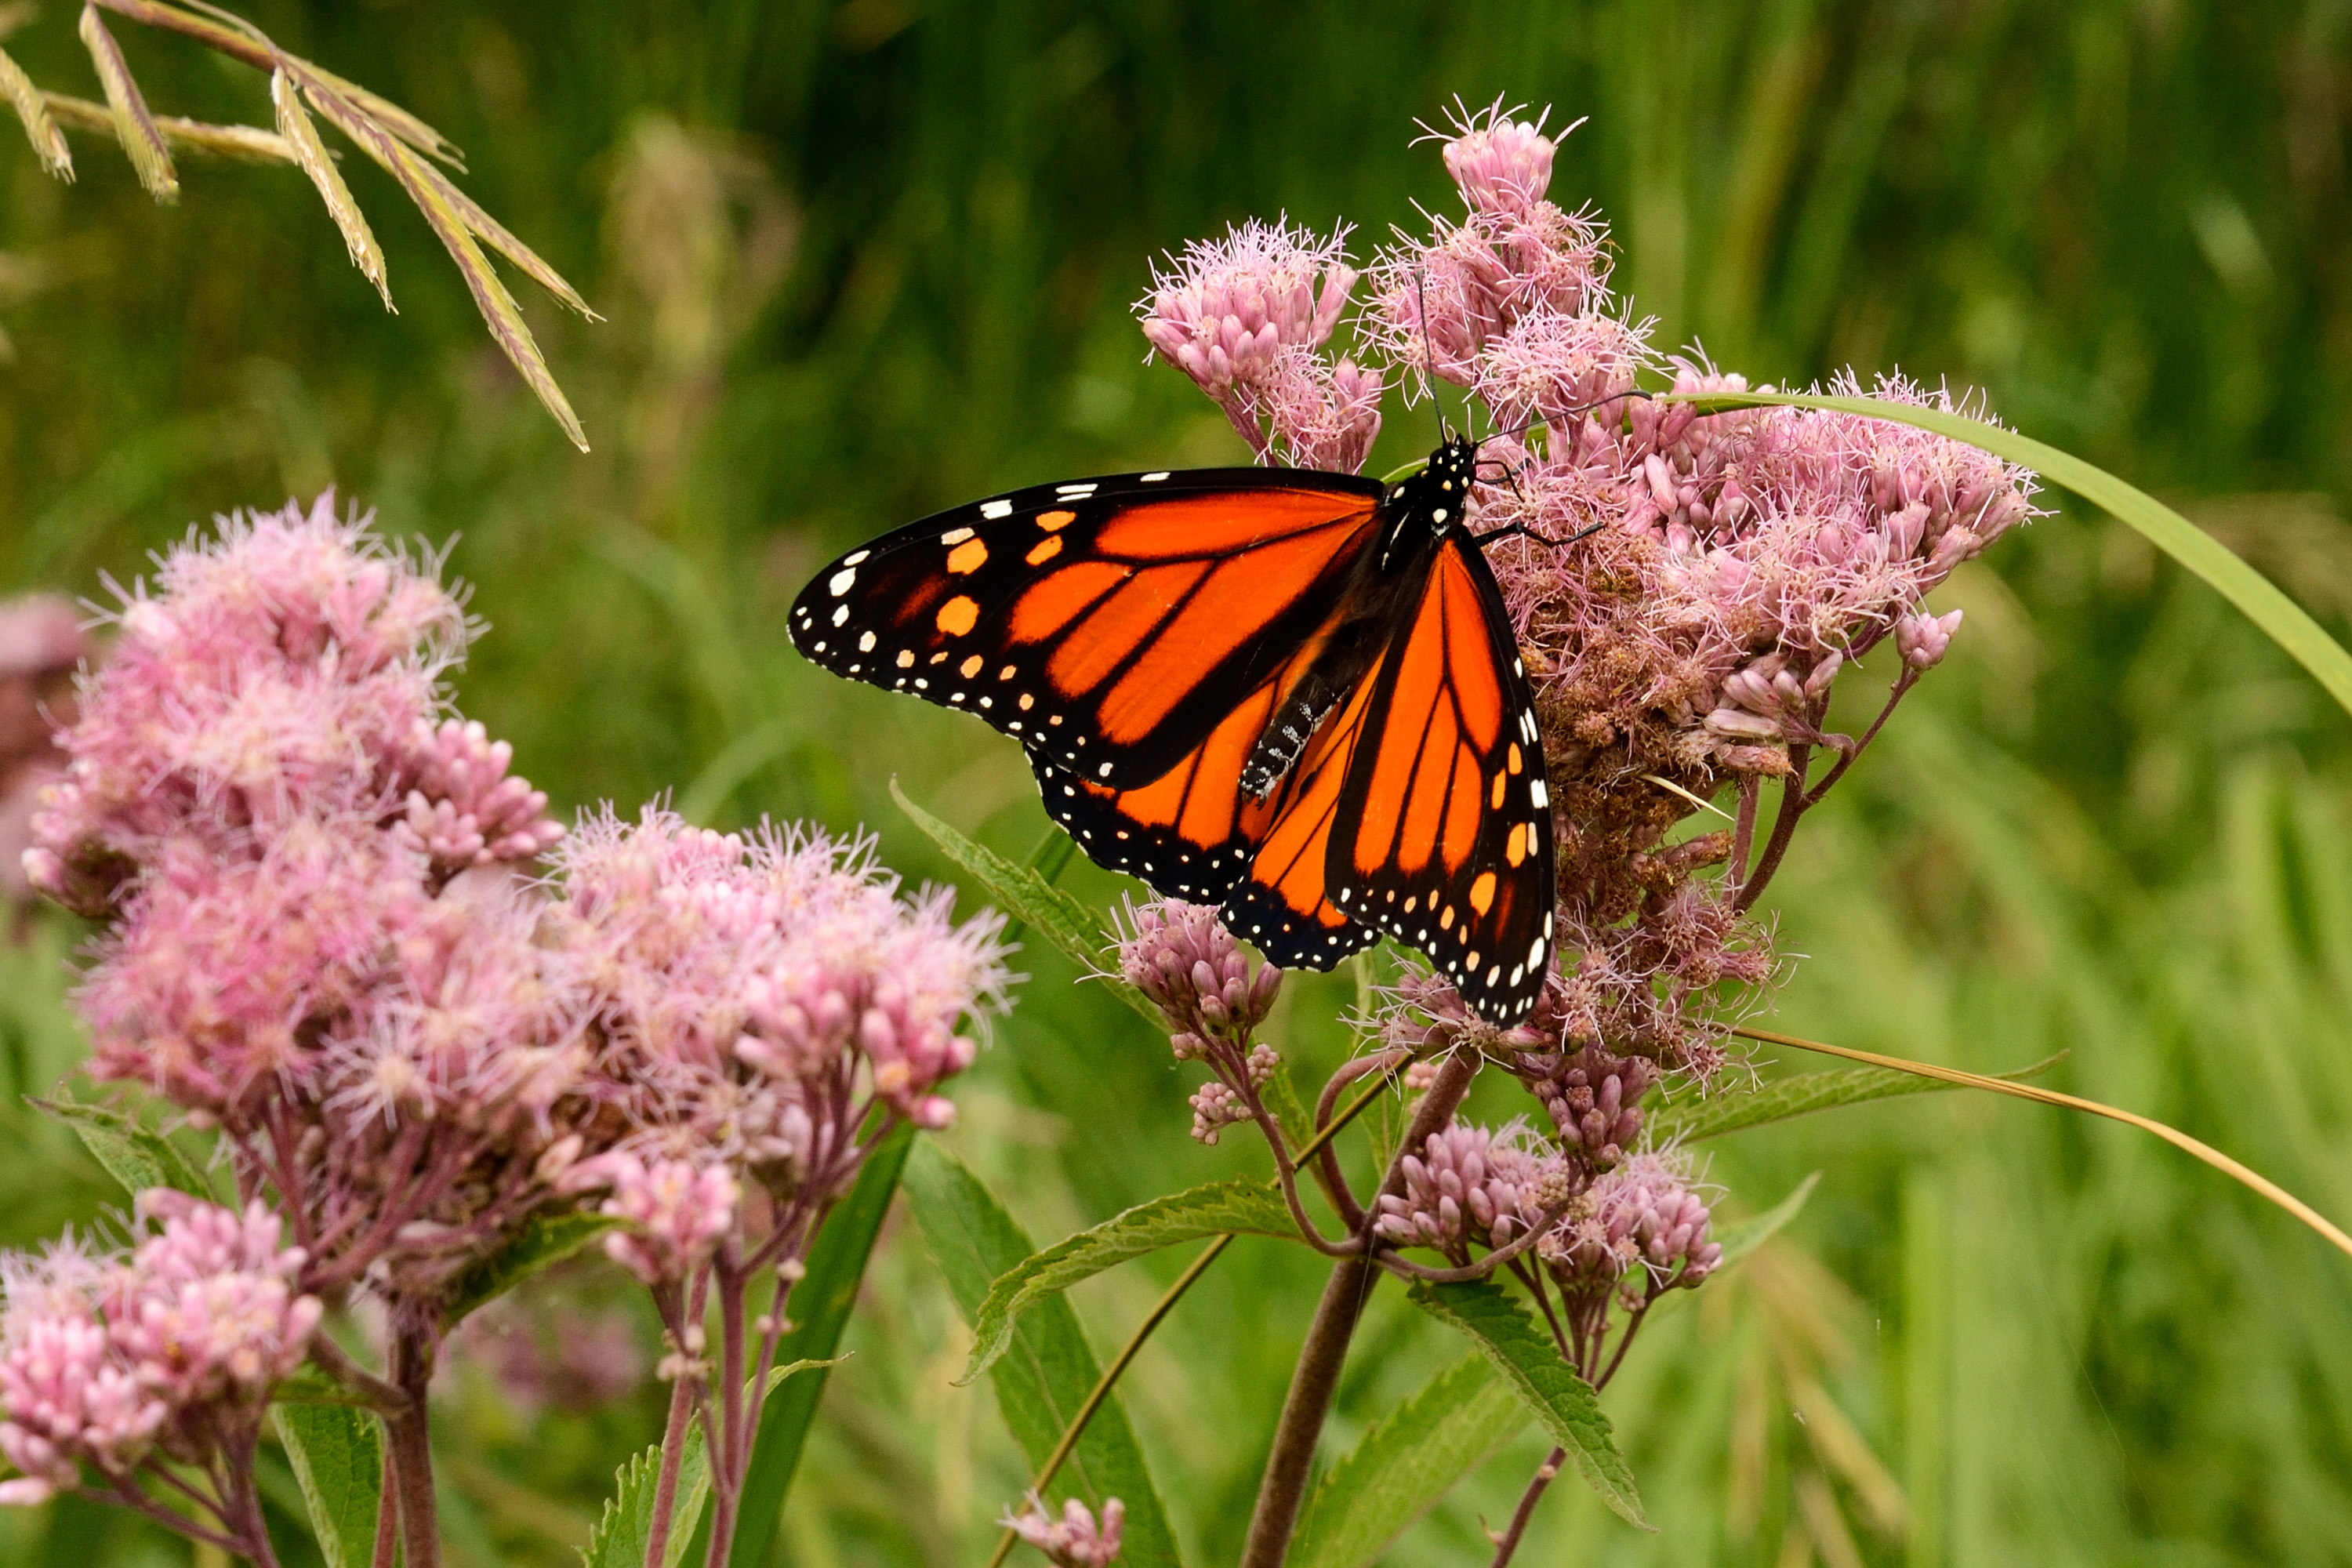 orange-and-black butterfly on pink flowers